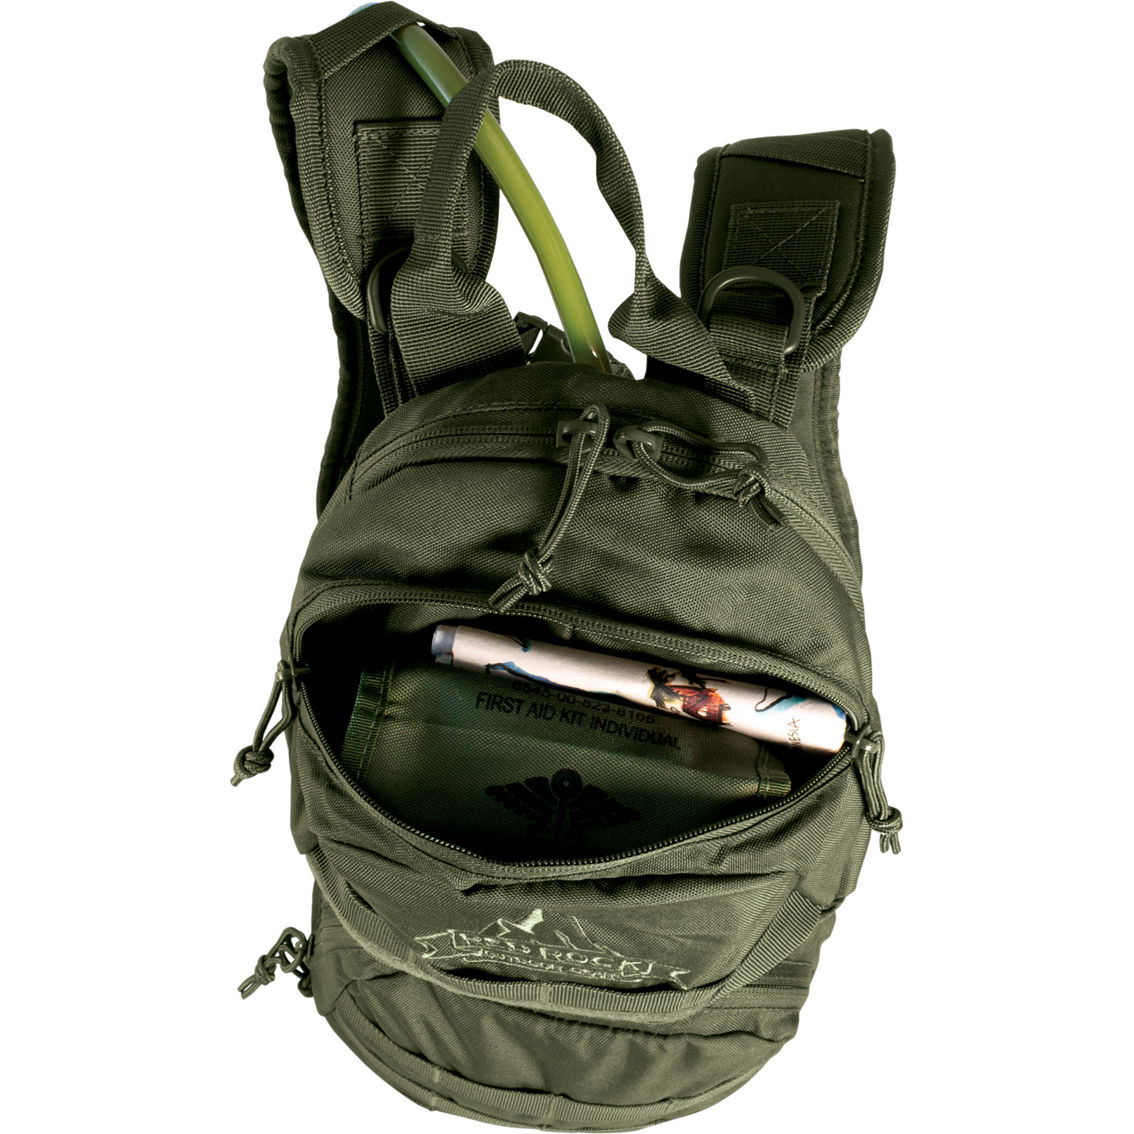 Red Rock Outdoor Gear Cactus Hydration Pack - Image 7 of 7